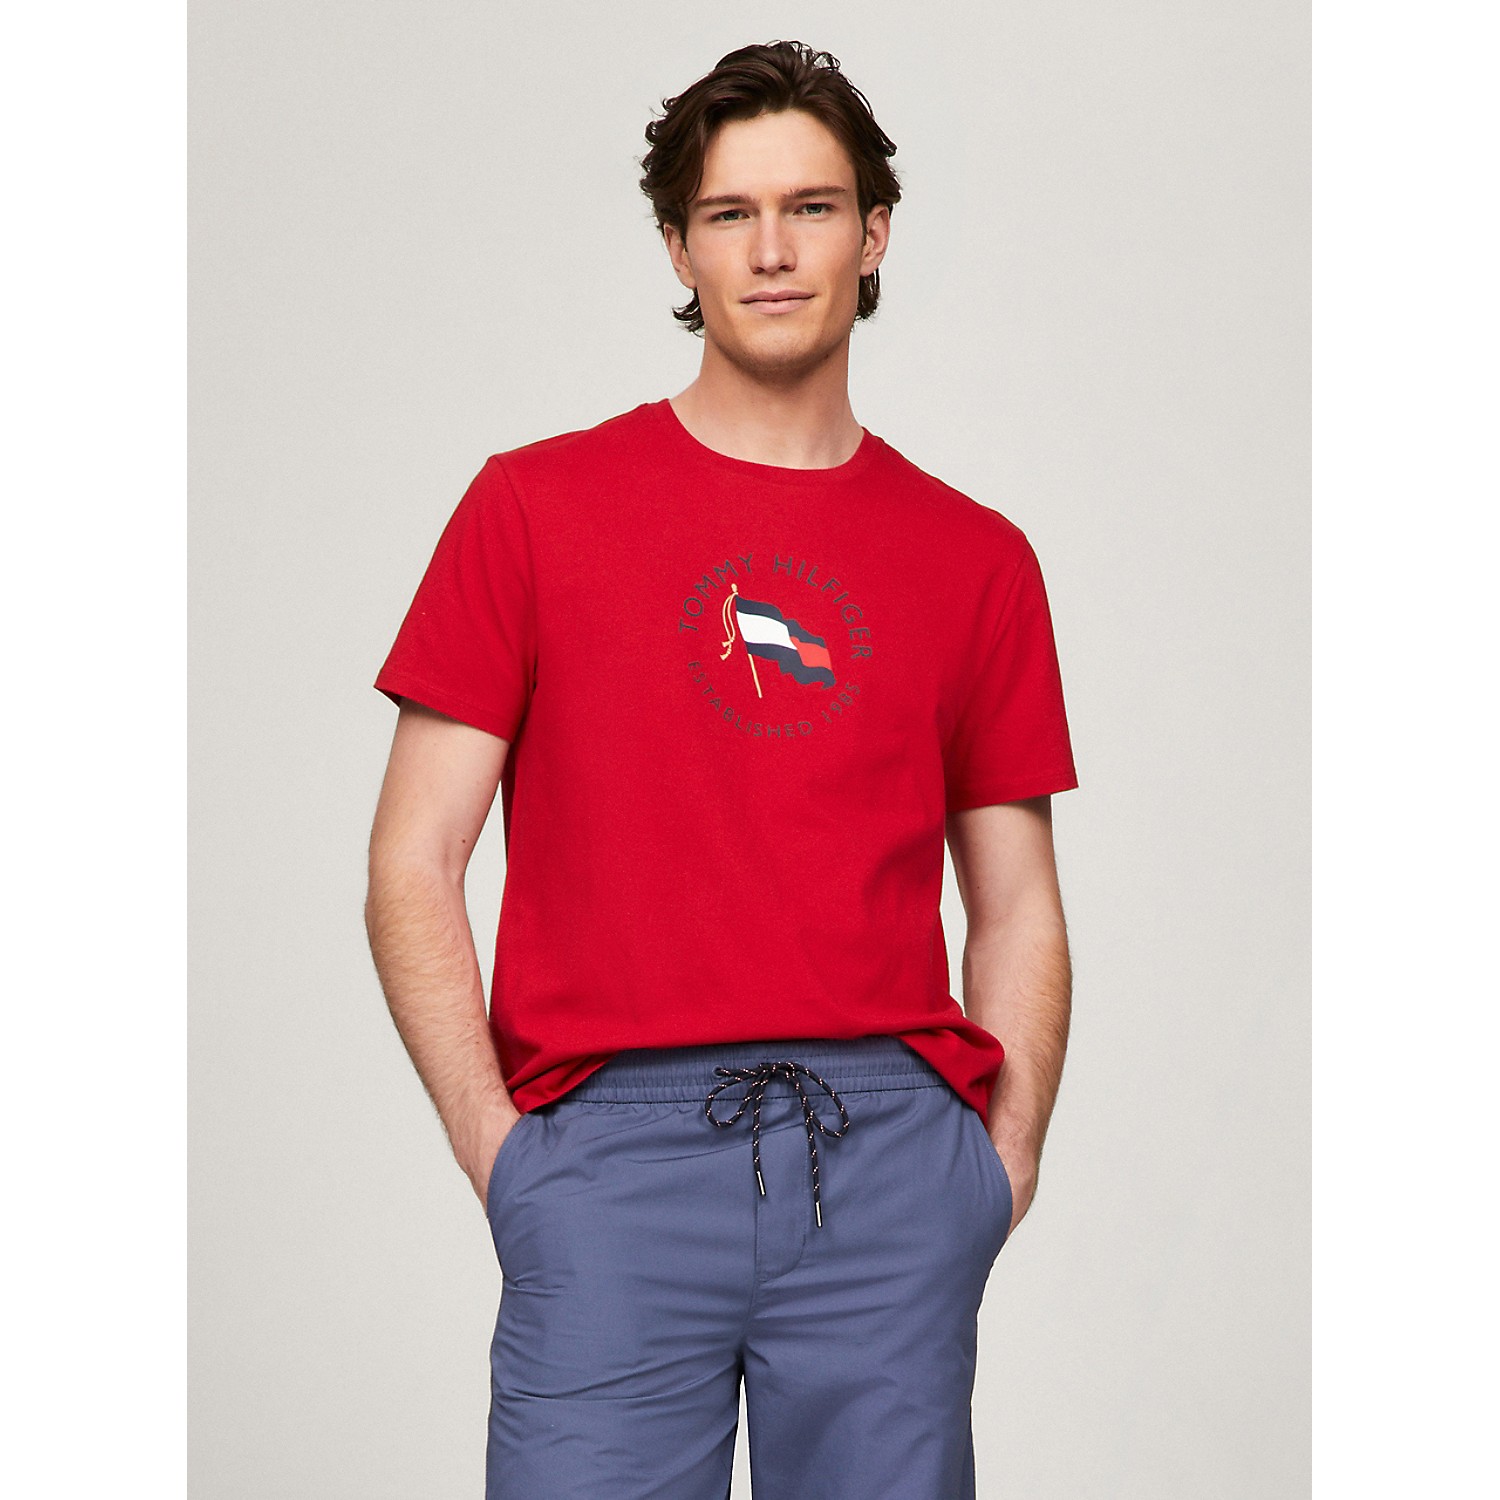 TOMMY HILFIGER TH Flag Graphic T-Shirt